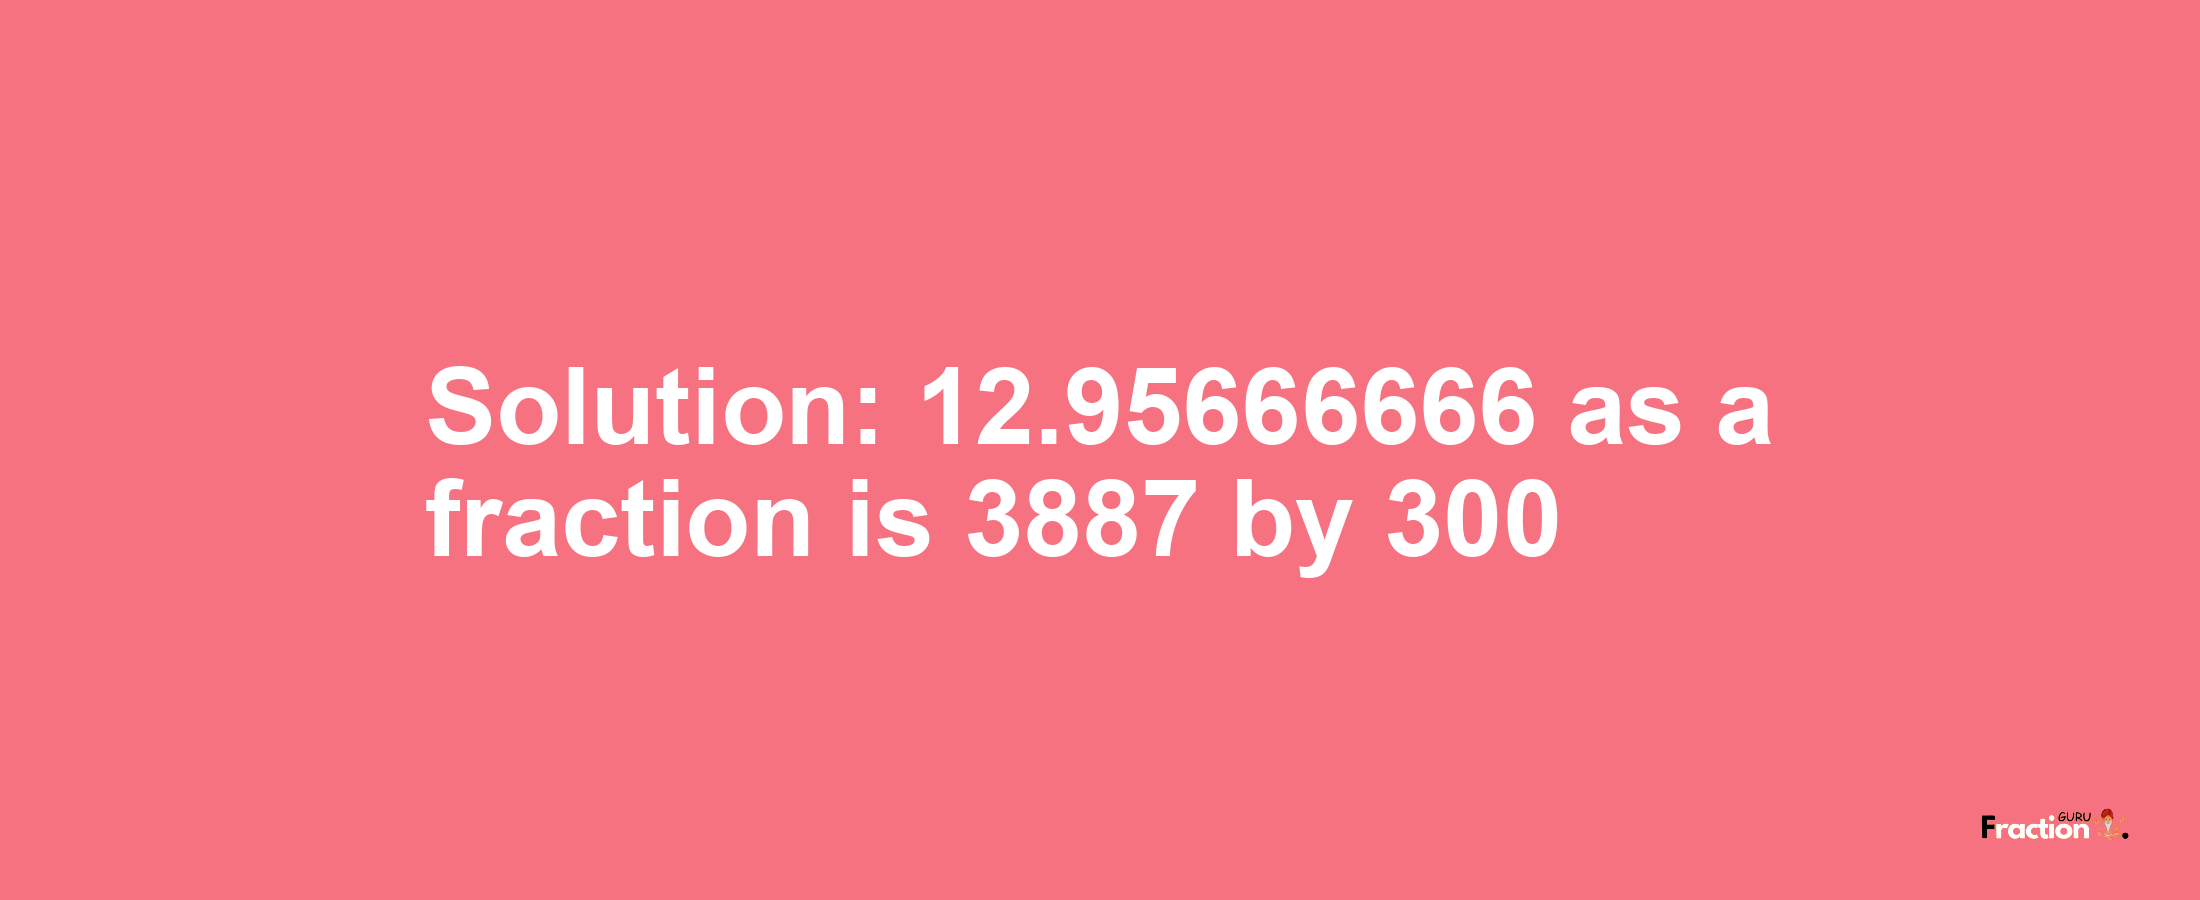 Solution:12.95666666 as a fraction is 3887/300